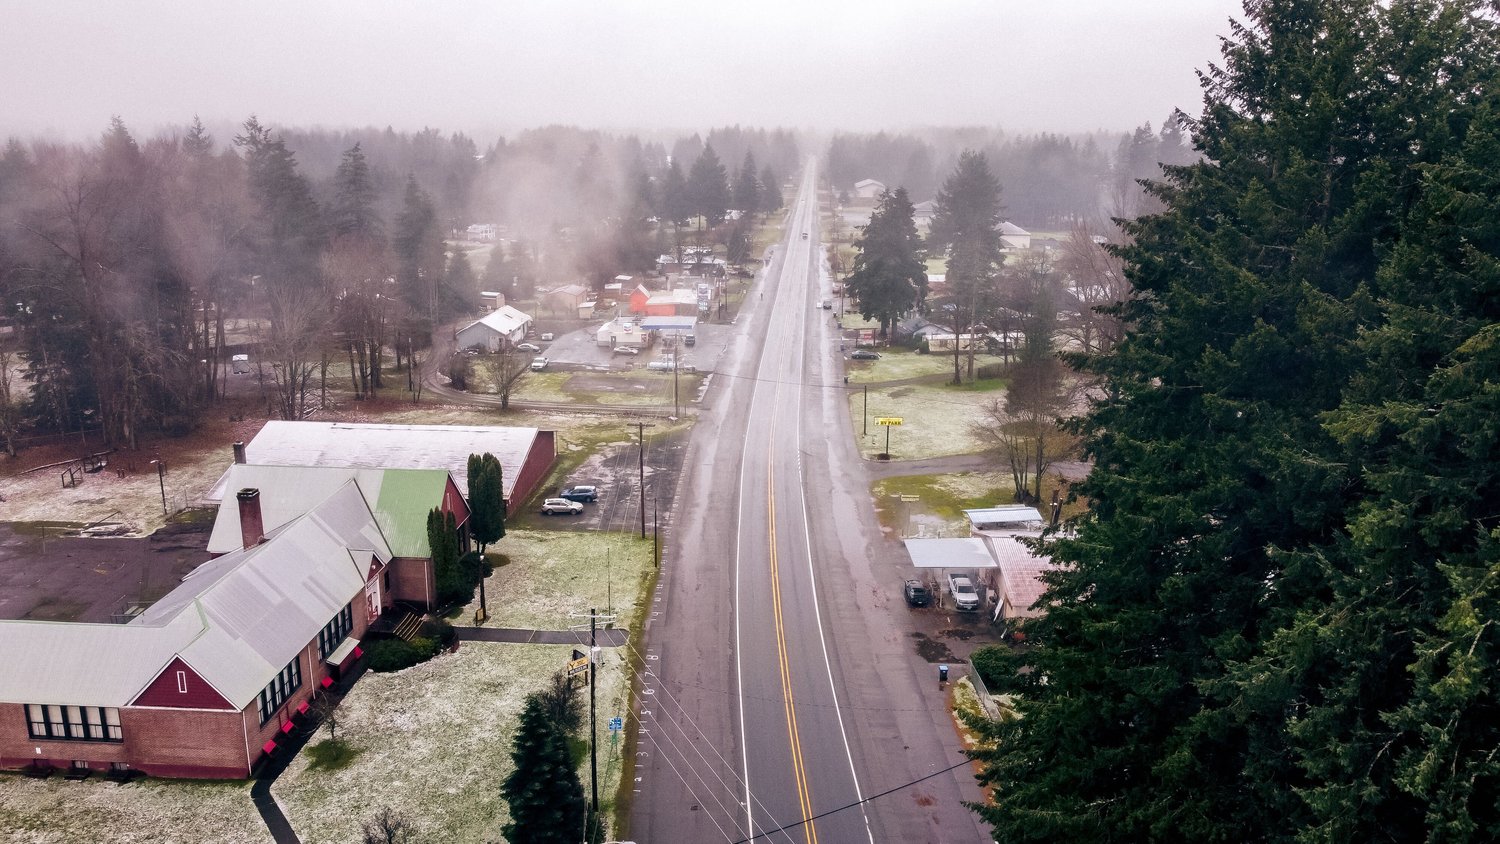 Downtown Packwood is seen on a foggy Monday after a dusting of snow.